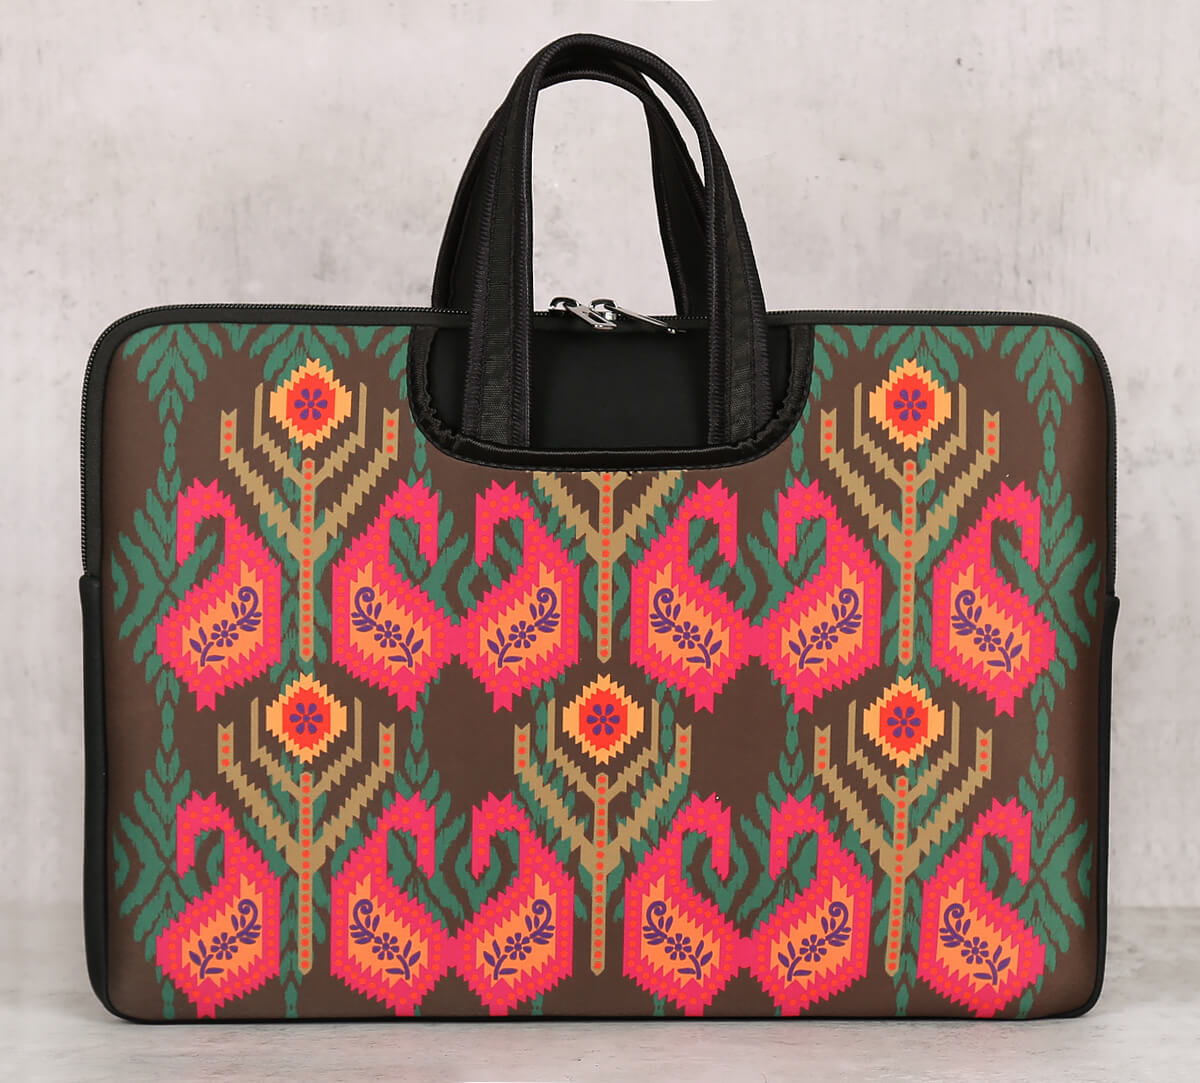 Festival Pijl Ronde Quivering Sublime Laptop Sleeve Bag | Laptop Sleeve Bag | india Circus